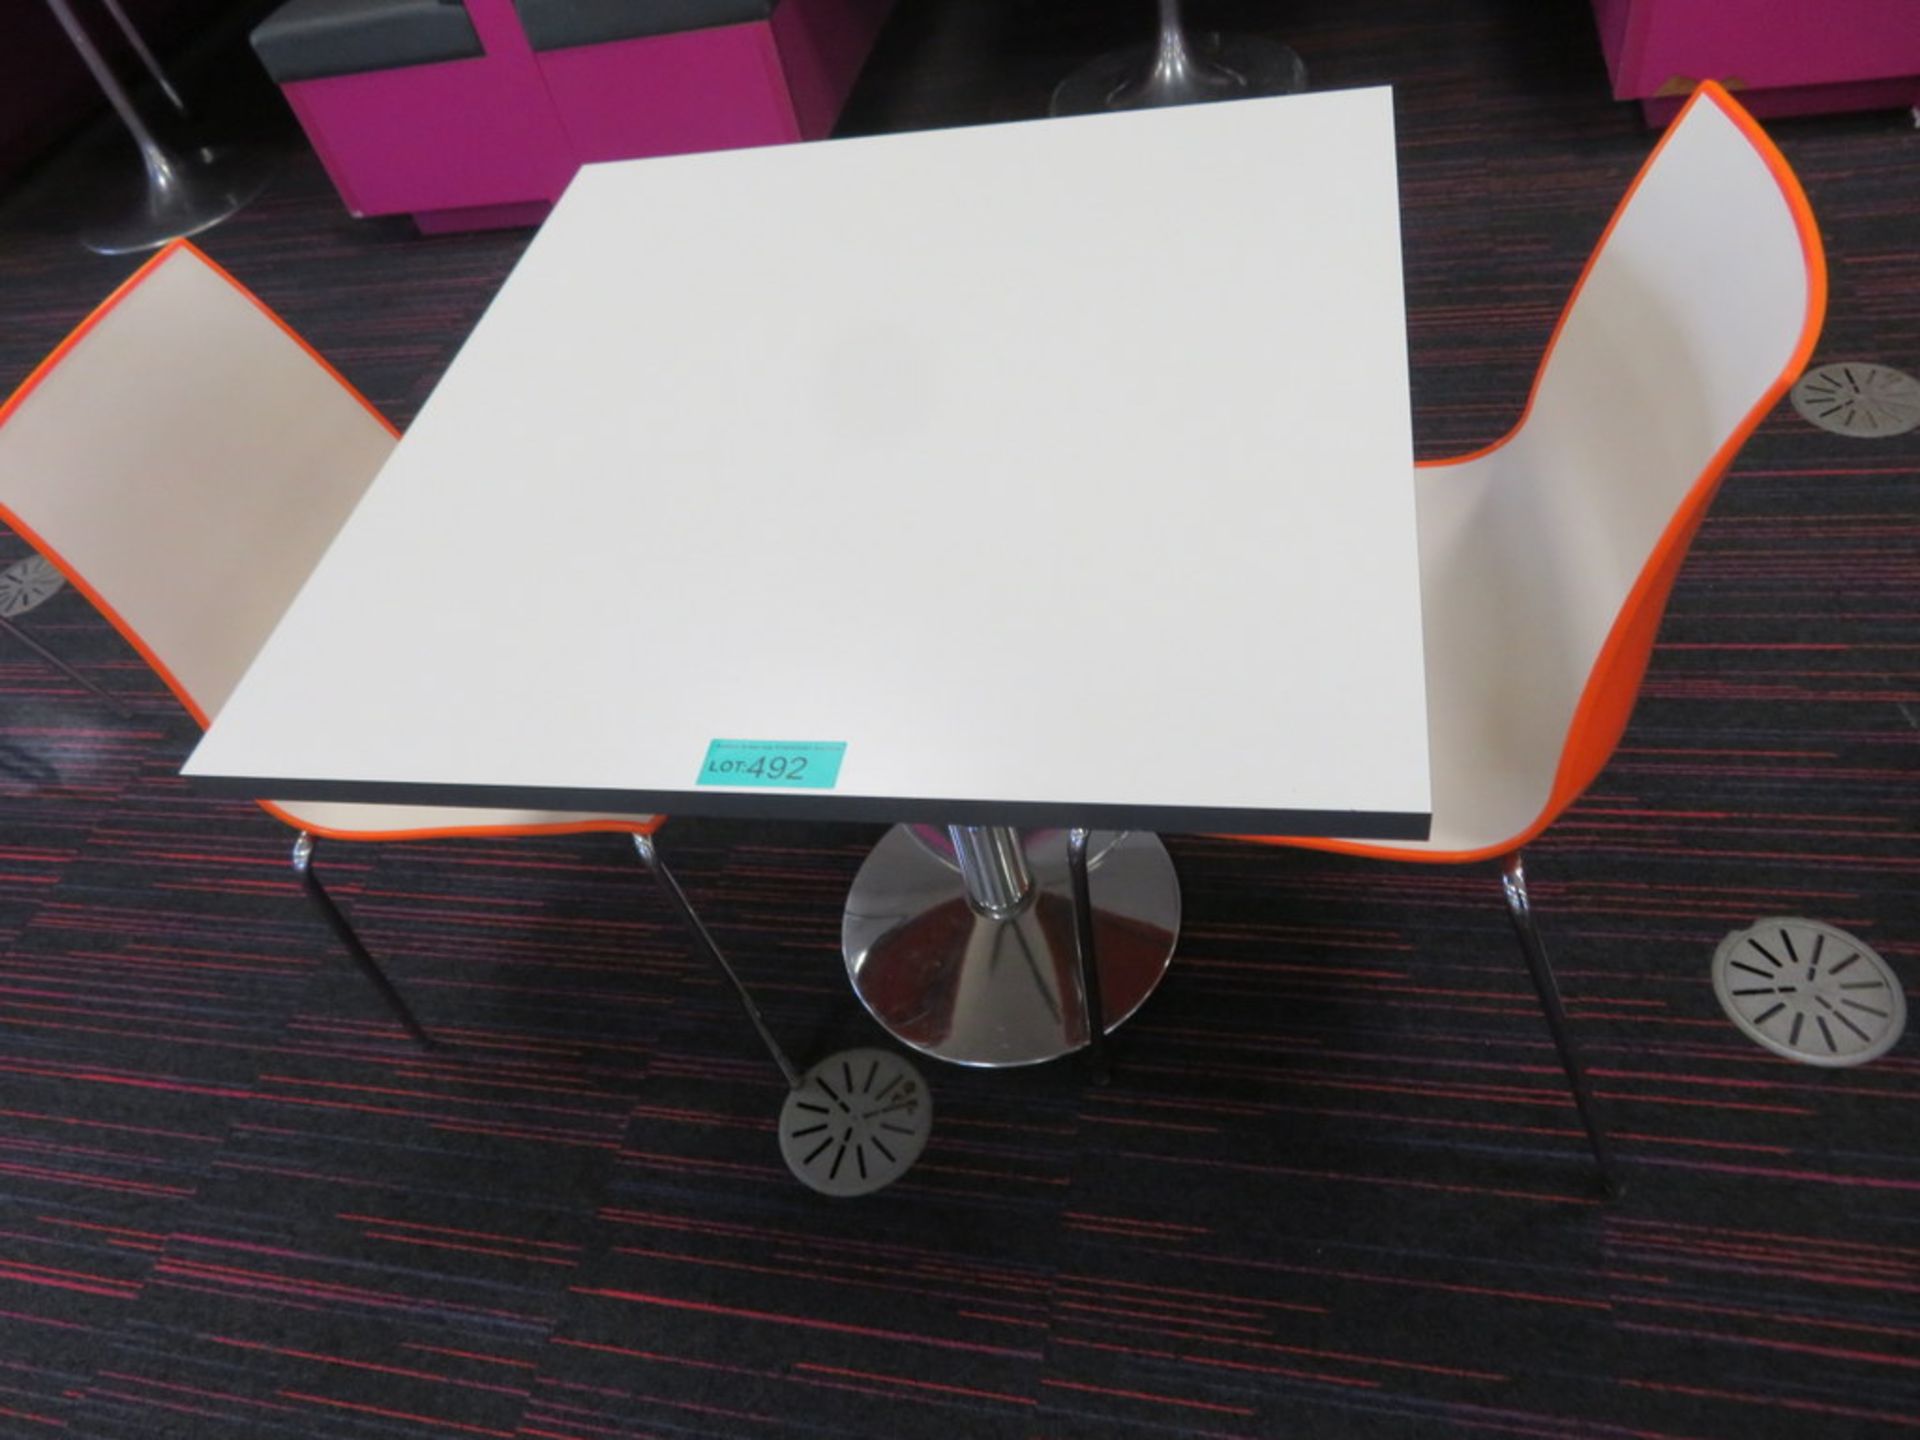 Canteen Table & 2 Chairs. Dimensions: 800x800x750mm (LxDxH) - Image 2 of 2